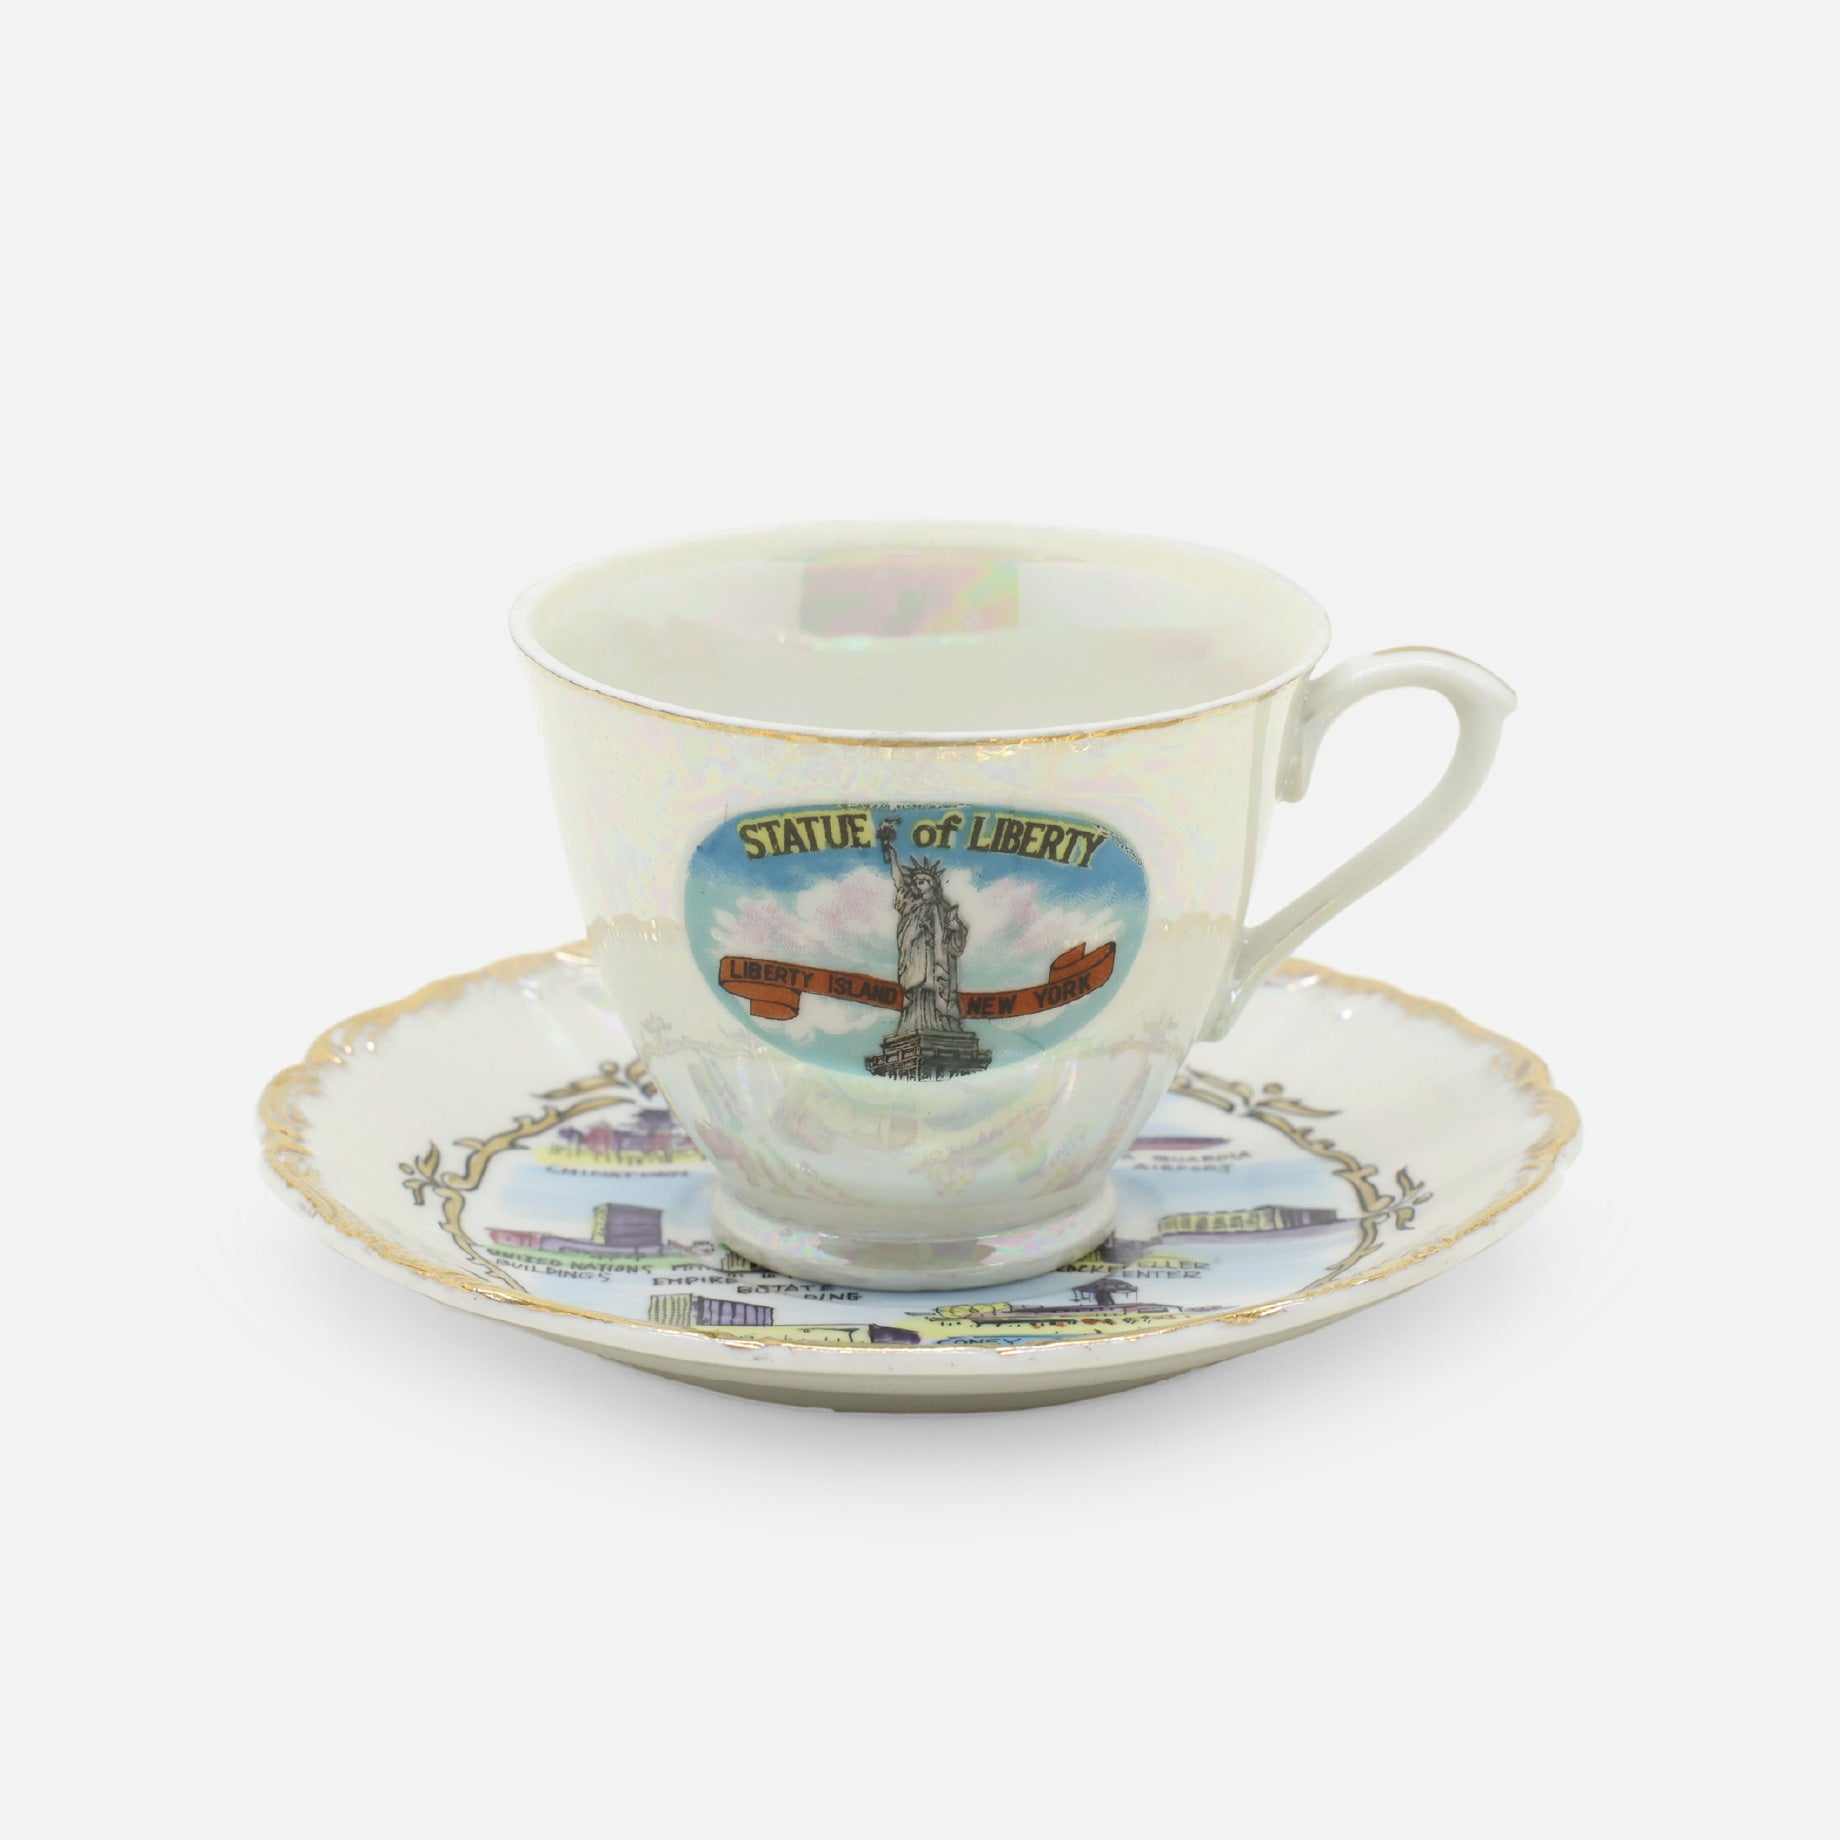 VINTAGE MISCELLANEOUS CERAMIC CUP & SAUCER（NEW YORK）